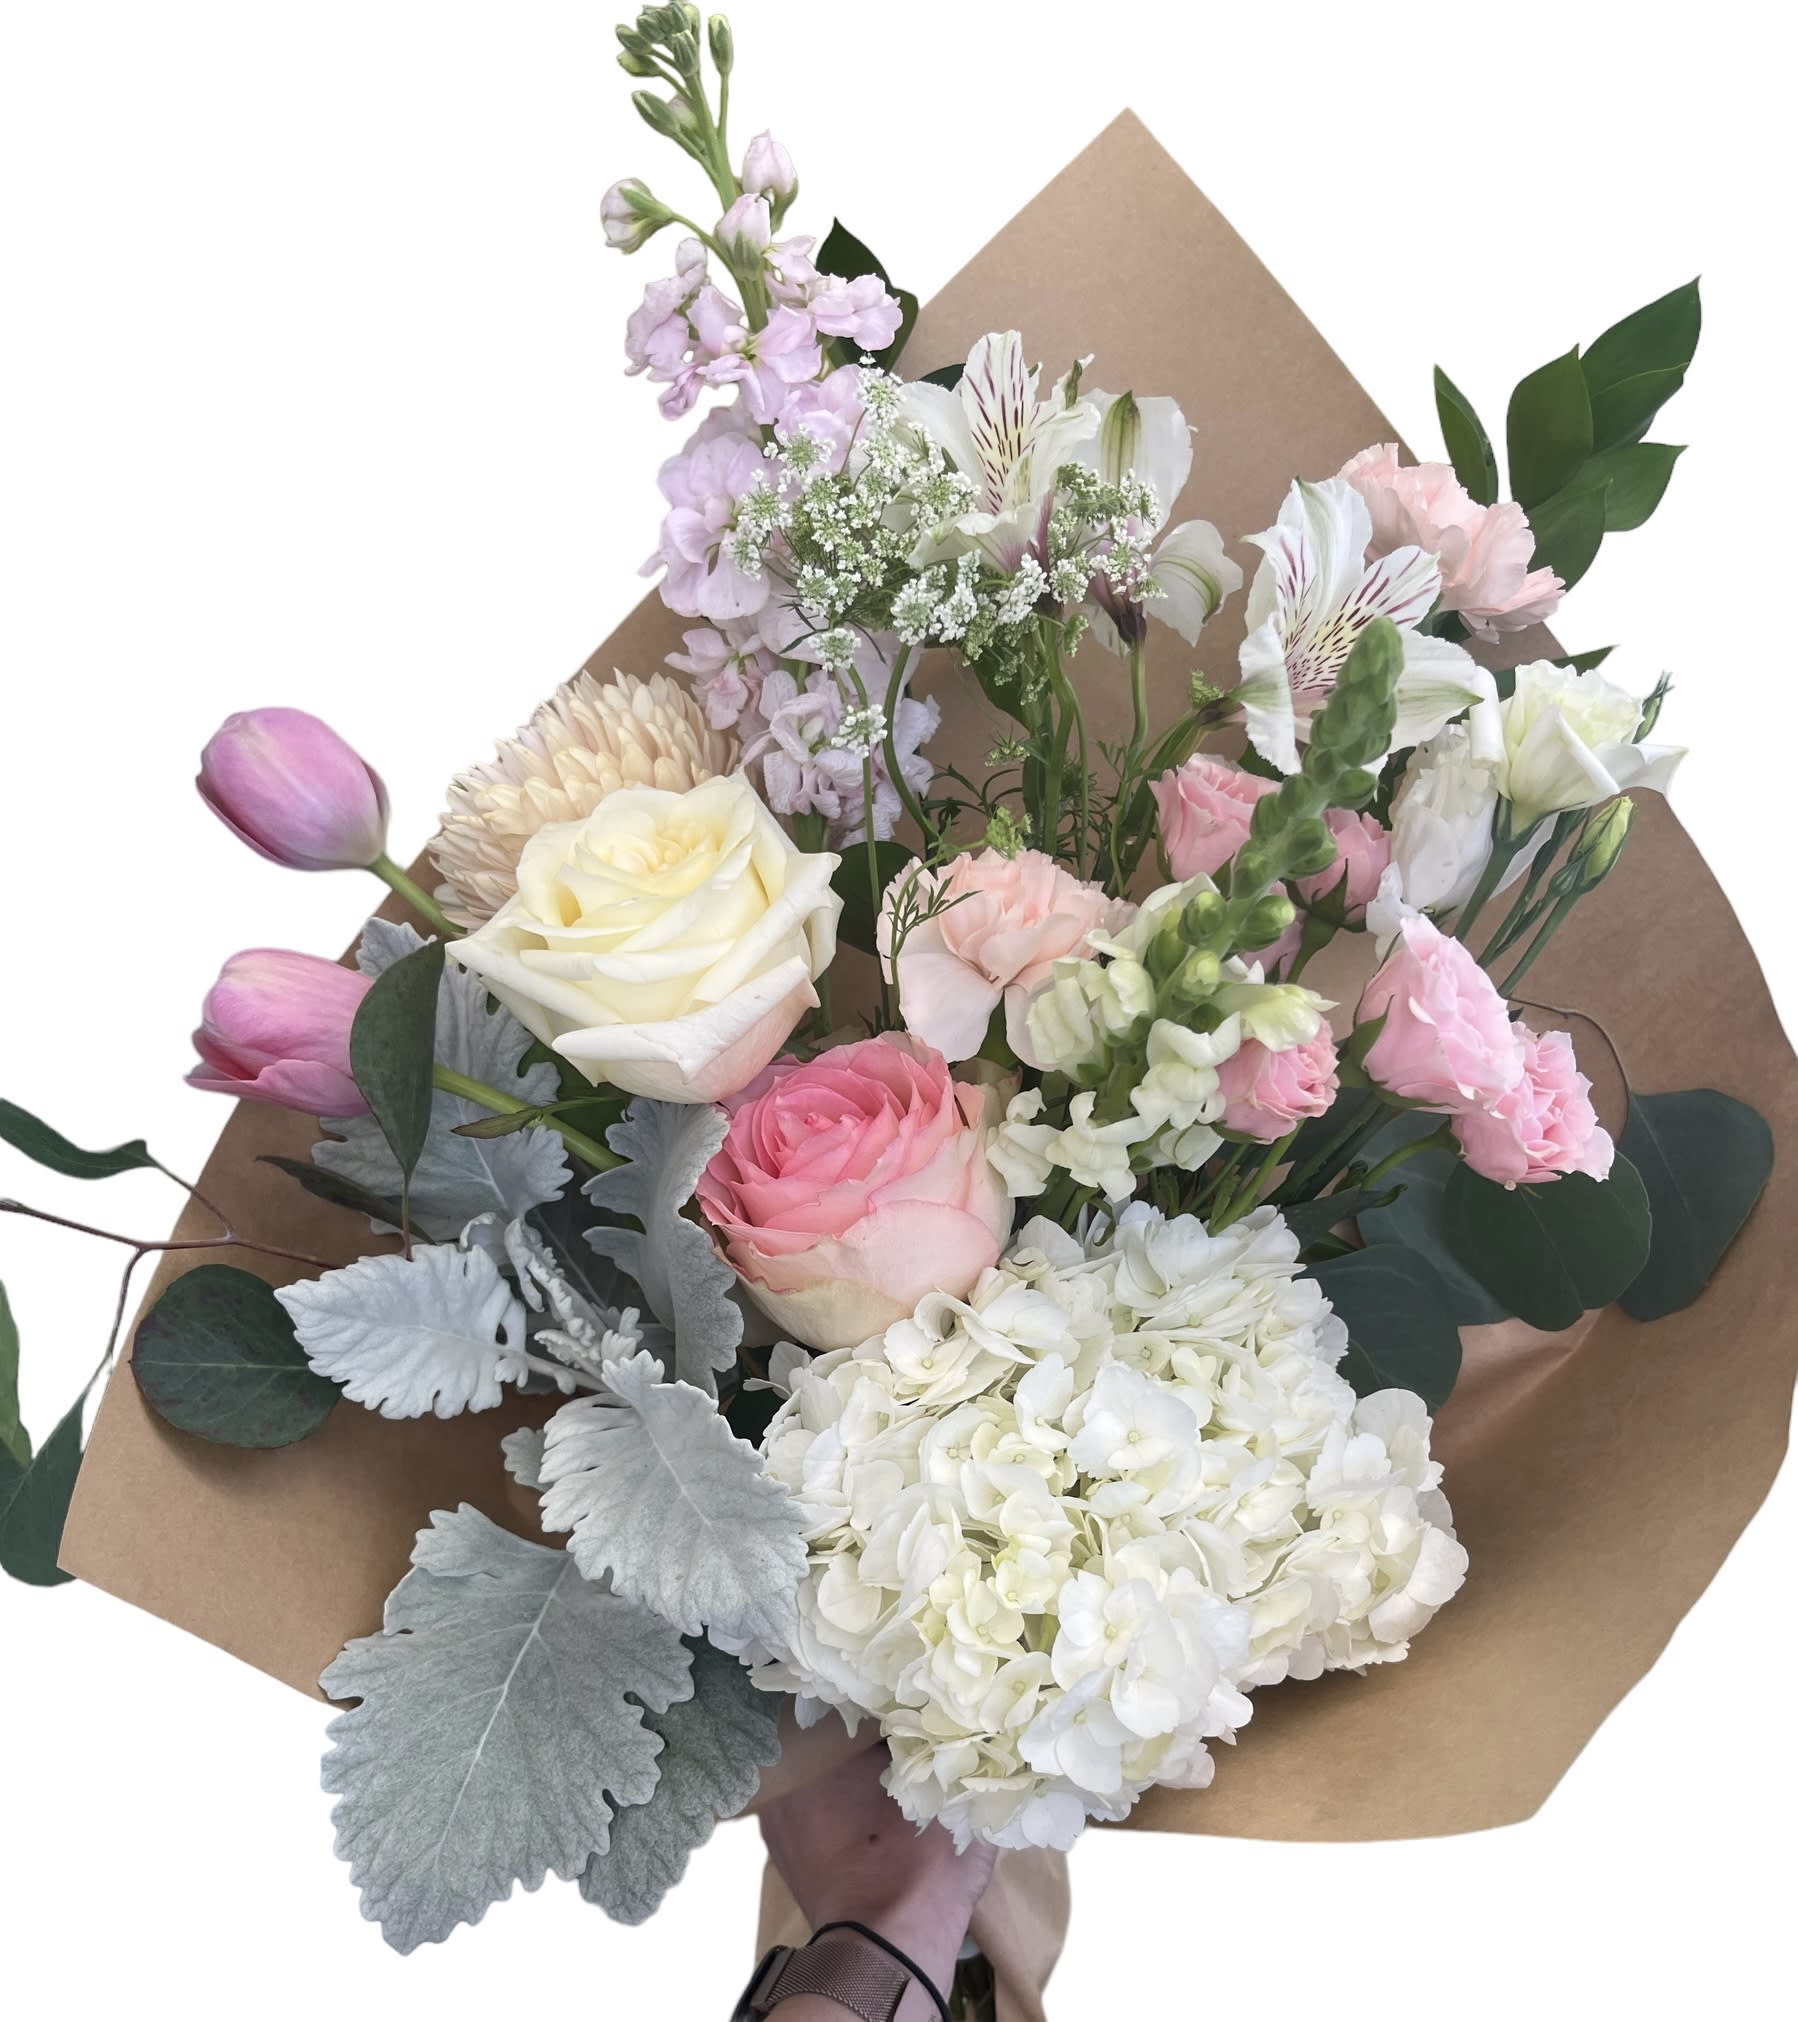 Soft Pastels Wrapped Bouquet  - Soft colors and neutrals that is perfect for any occasion.